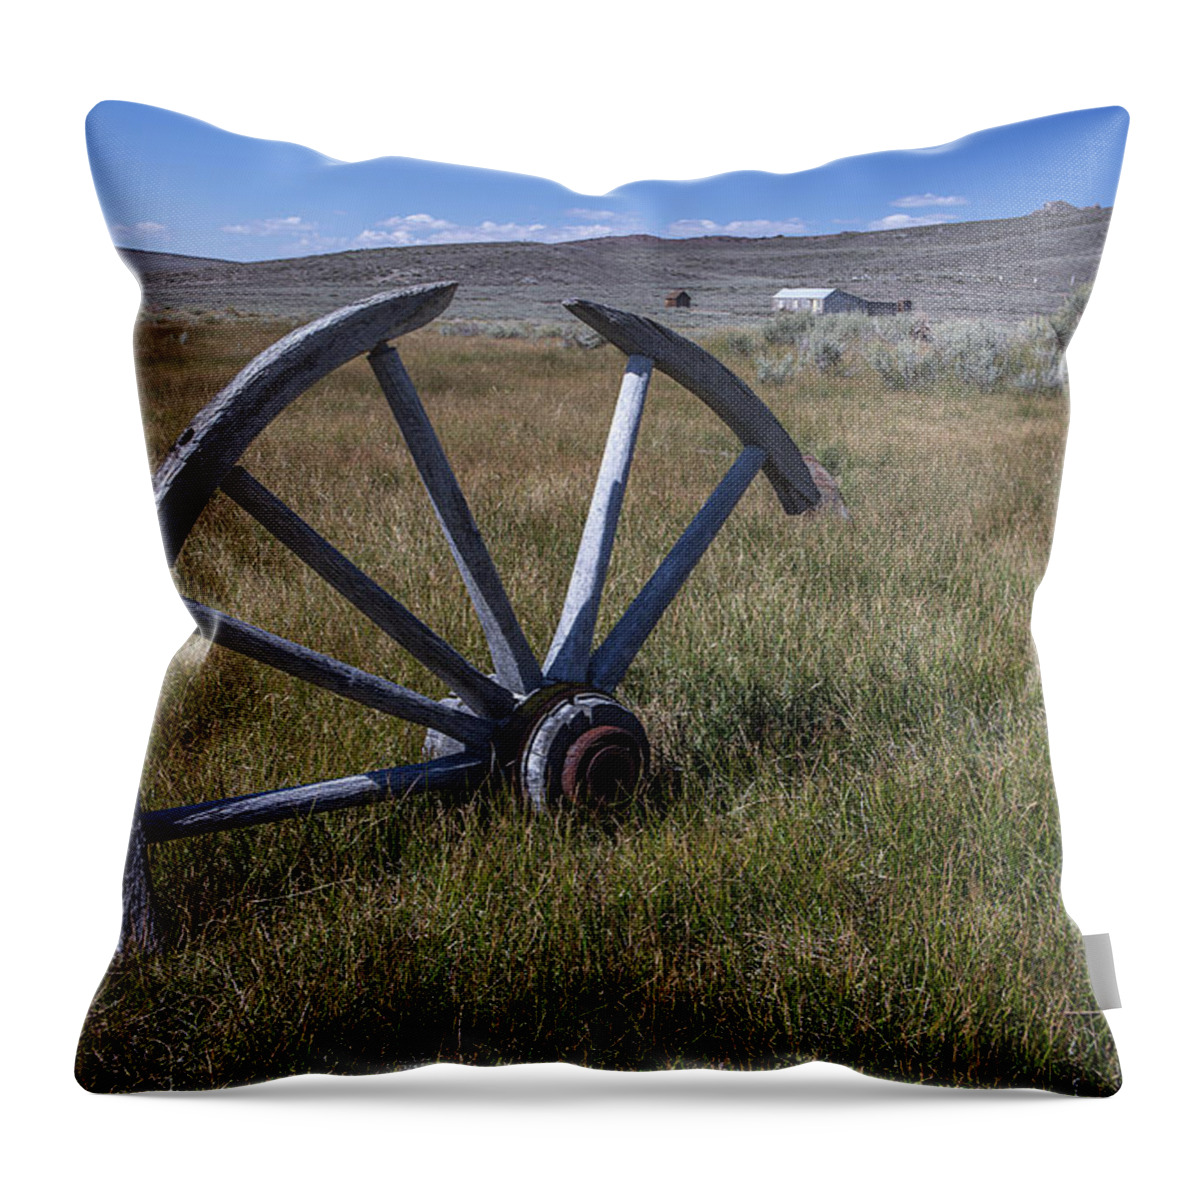 Blue Throw Pillow featuring the photograph Left Behind by Jon Glaser